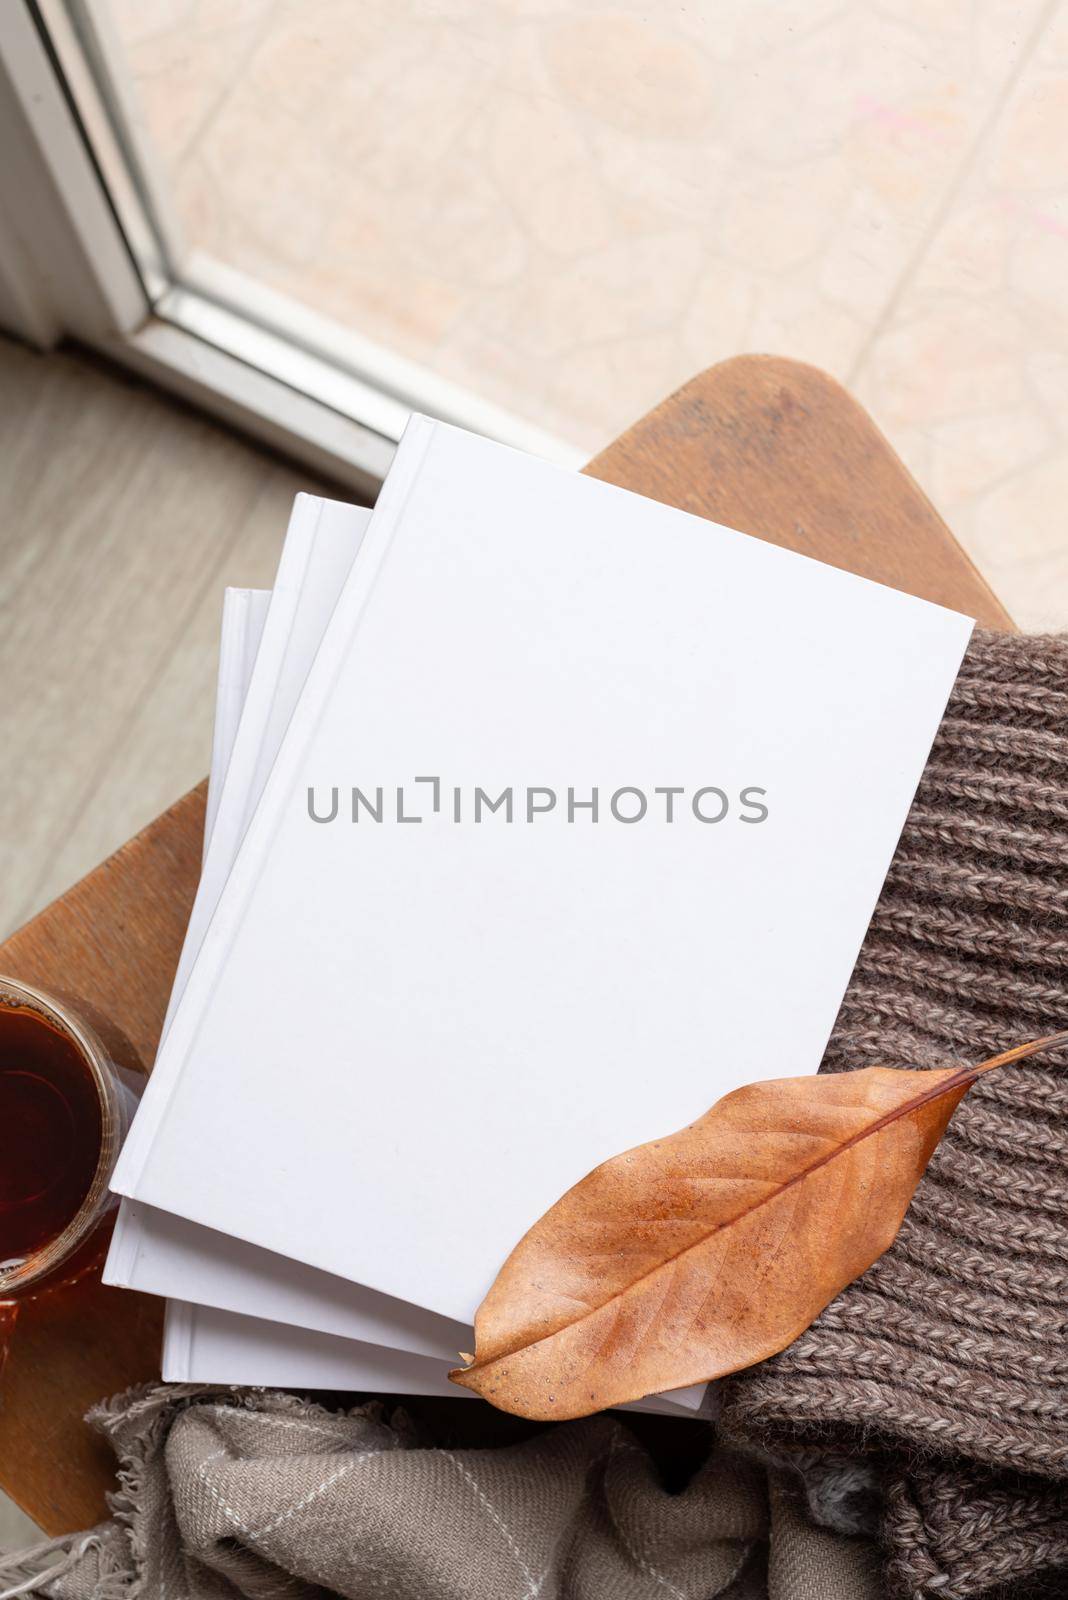 Back to school. Cozy autumn. Study and education concept. Stack of white blank books with autumn leaves and cup of hot tea on old wooden chair, mockup design